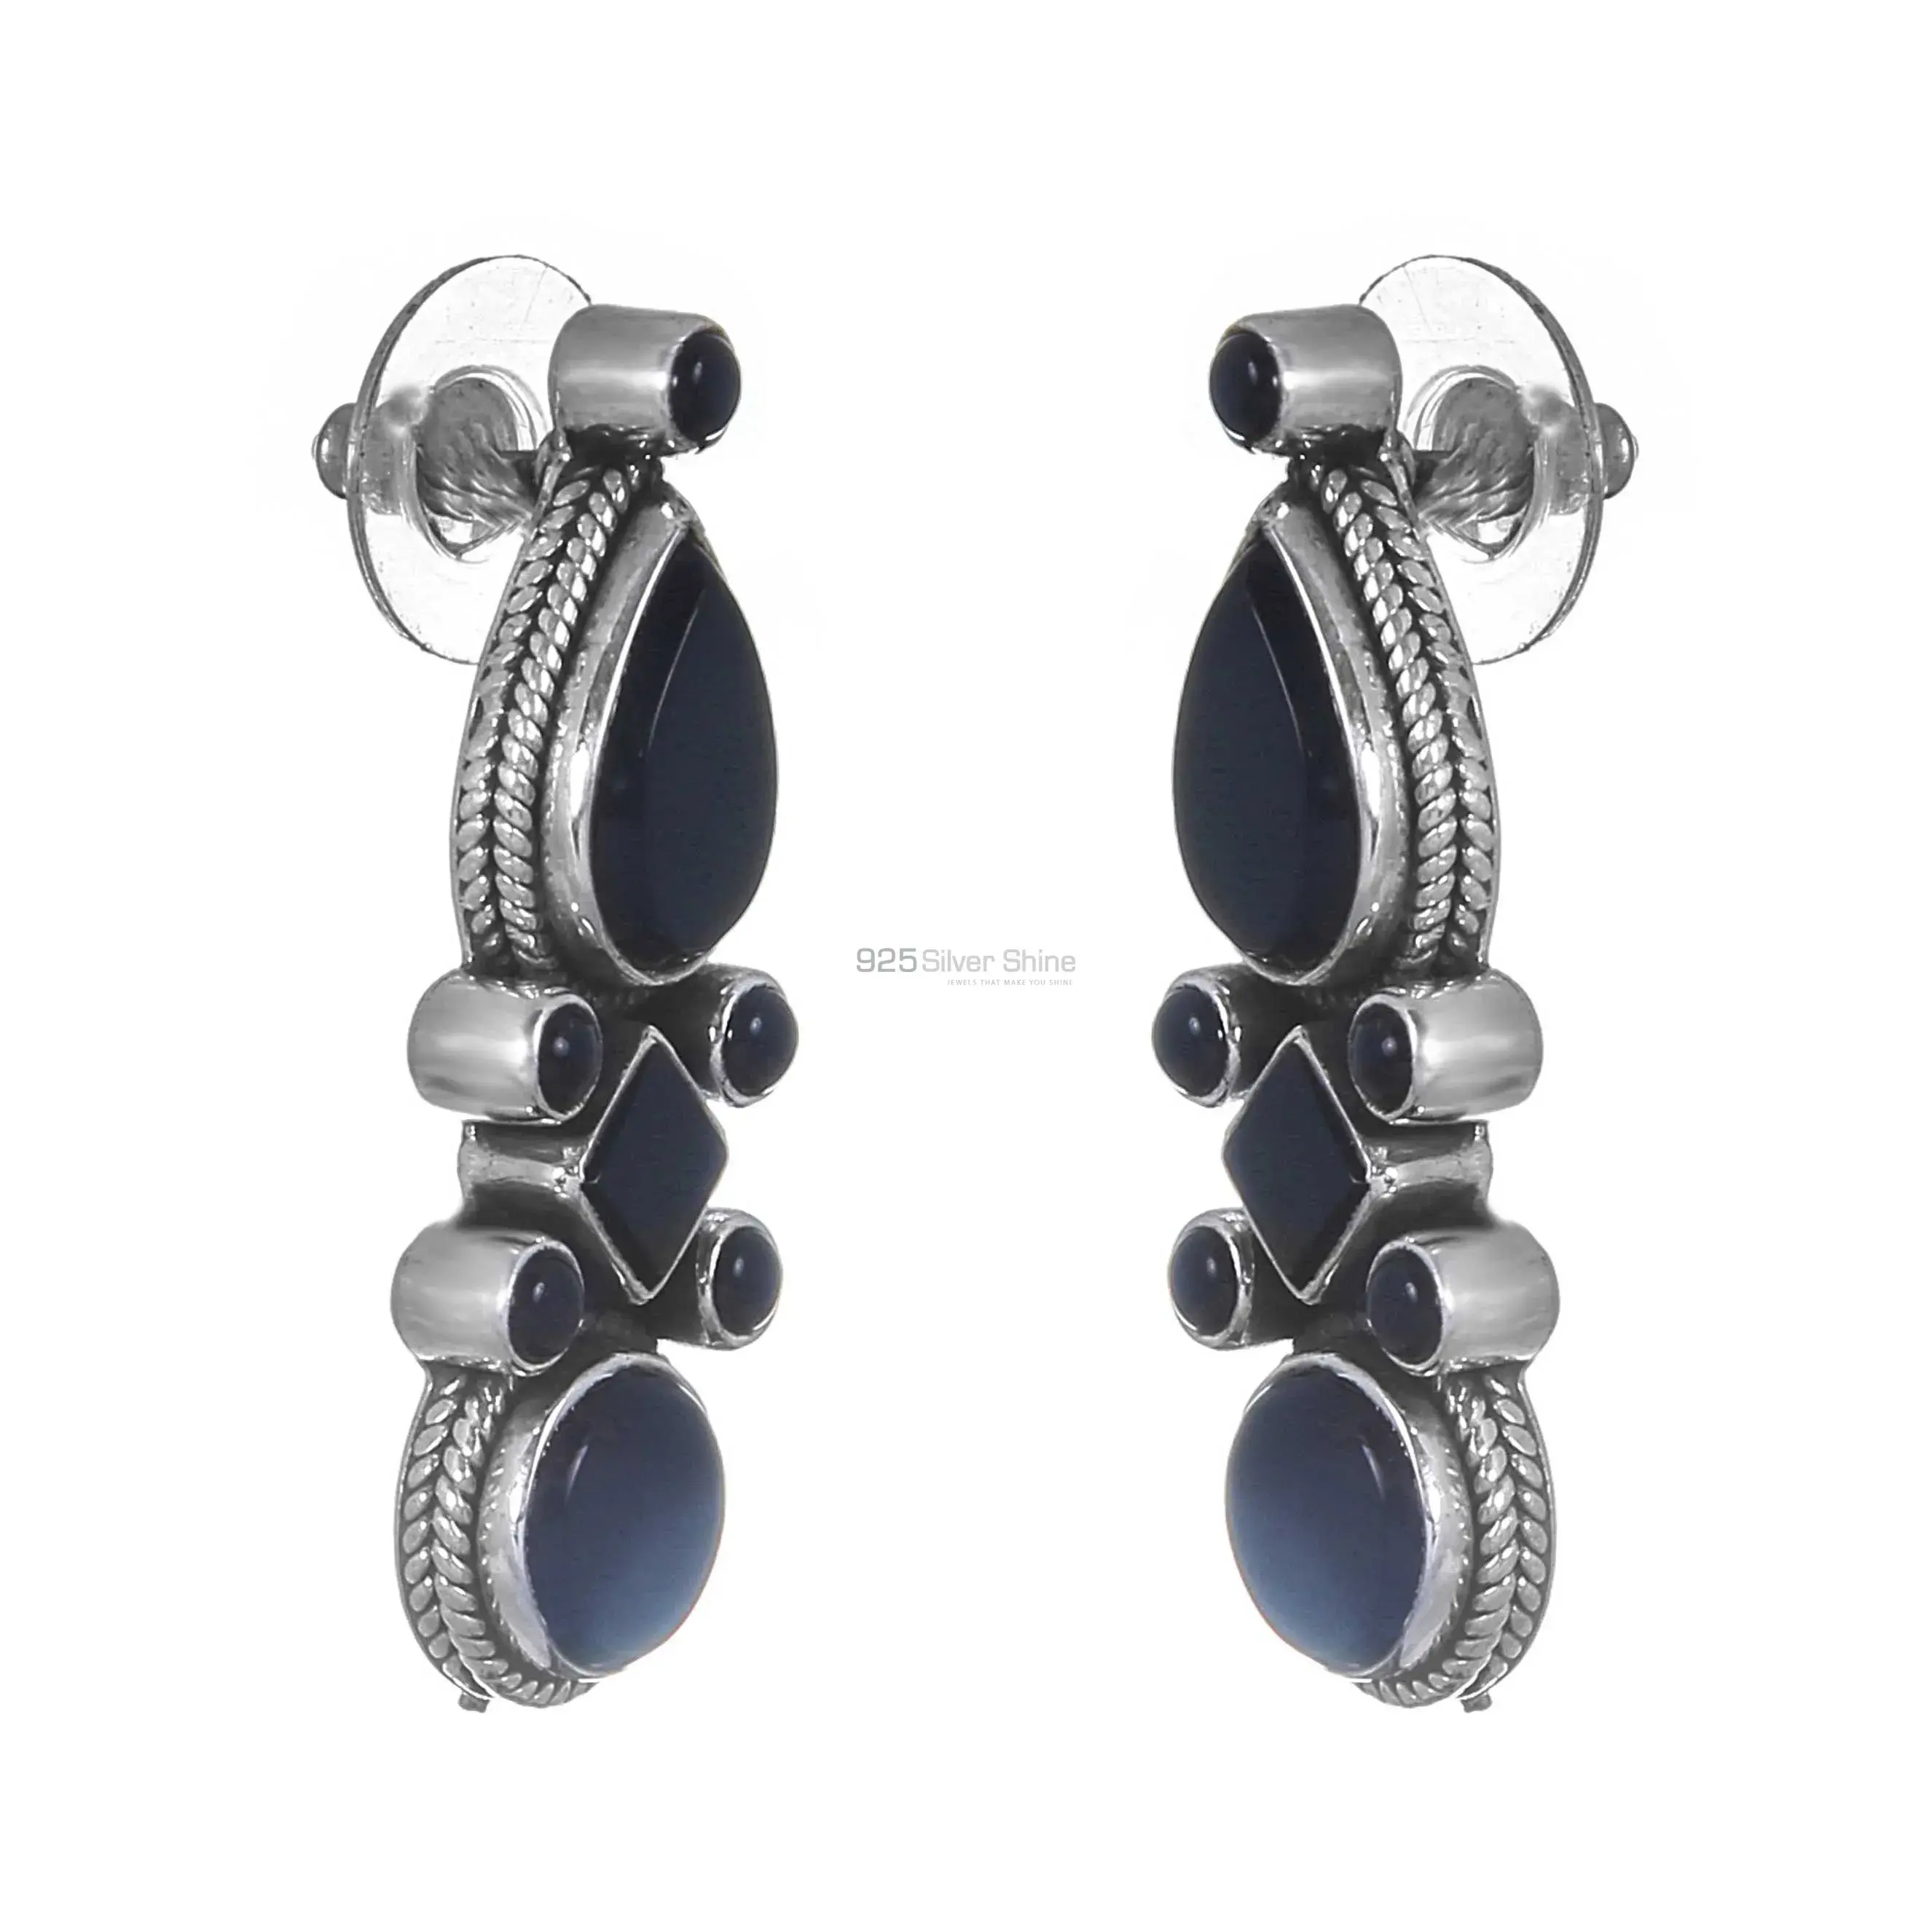 Affordable 925 Sterling Silver Handmade Earrings Manufacturer In Lapis Gemstone Jewelry 925SE282_0